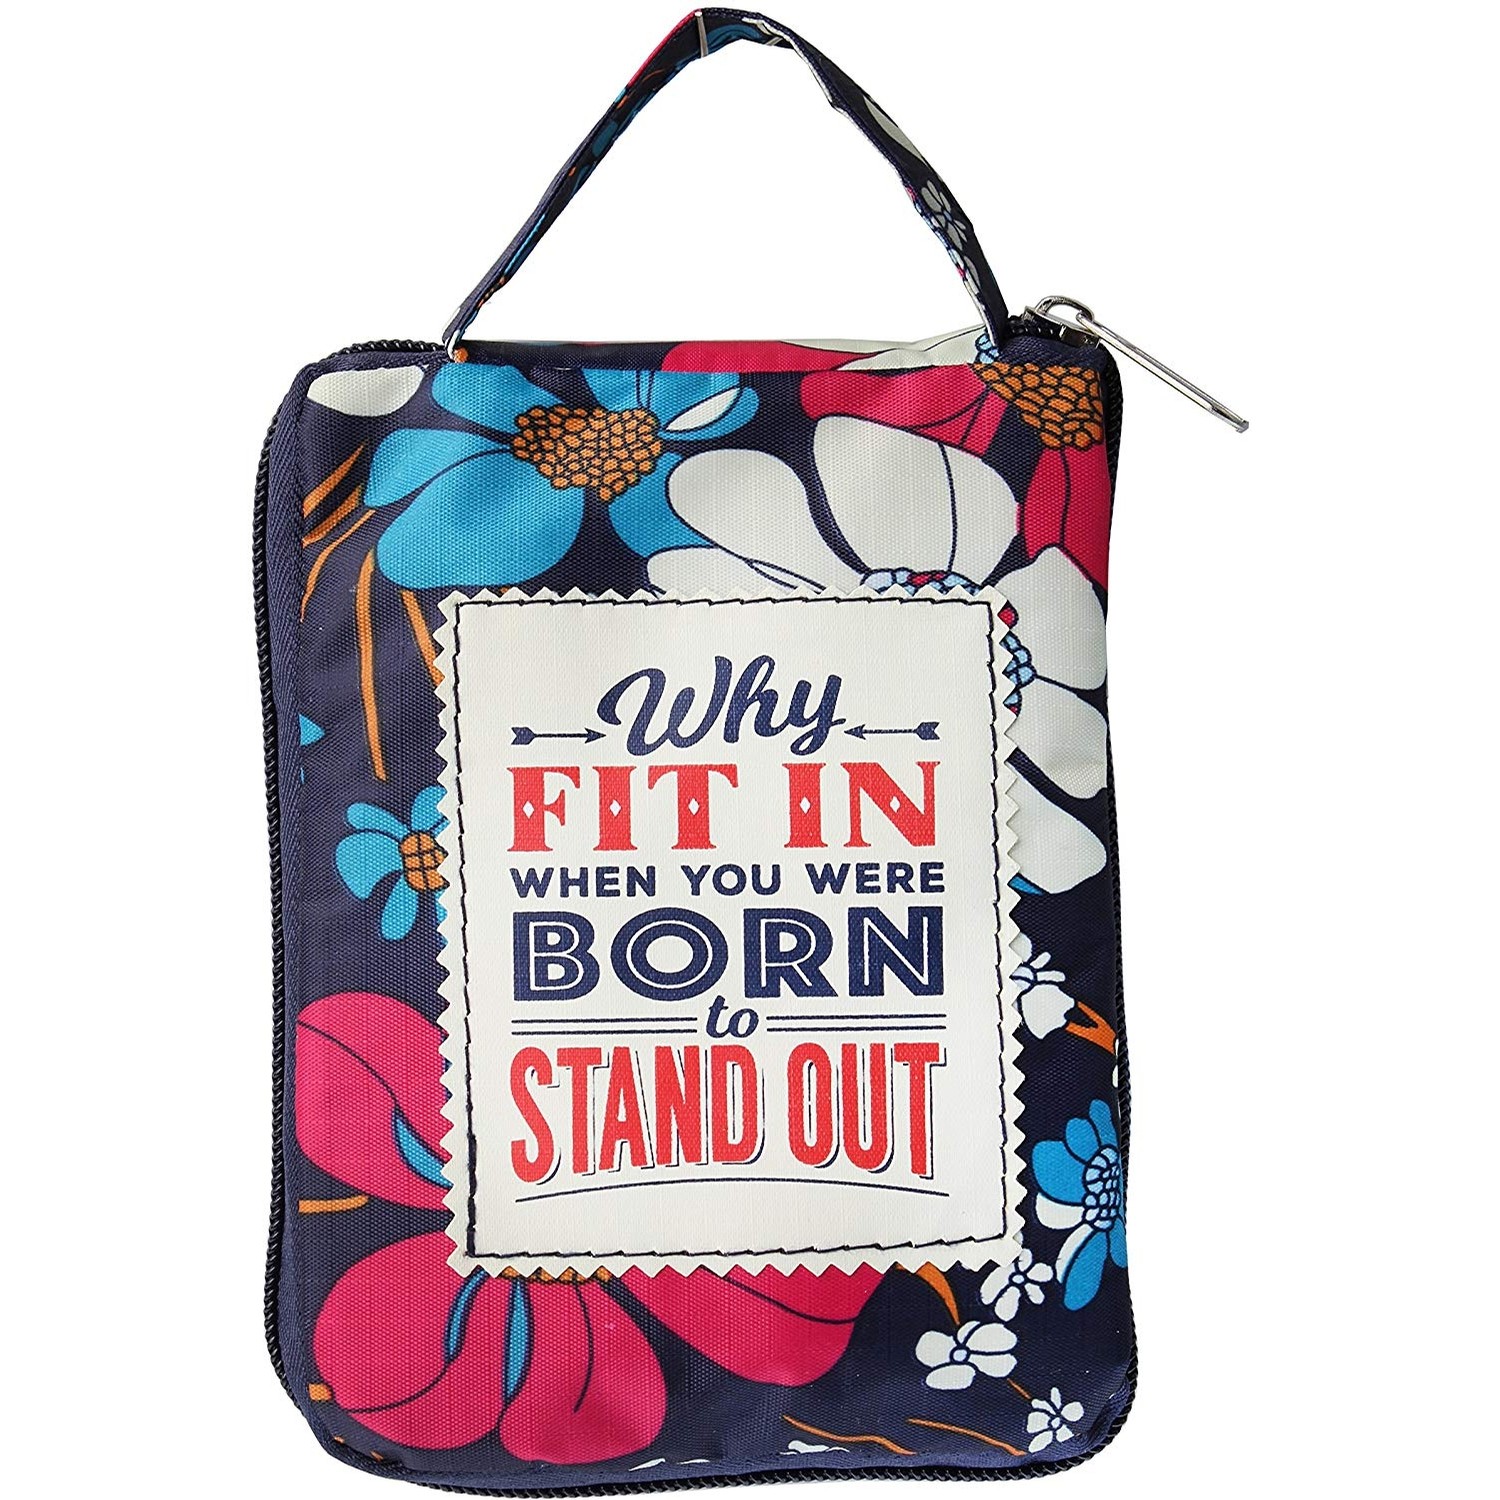 History & Heraldry Inc Fab Girl Bag (Stand Out)